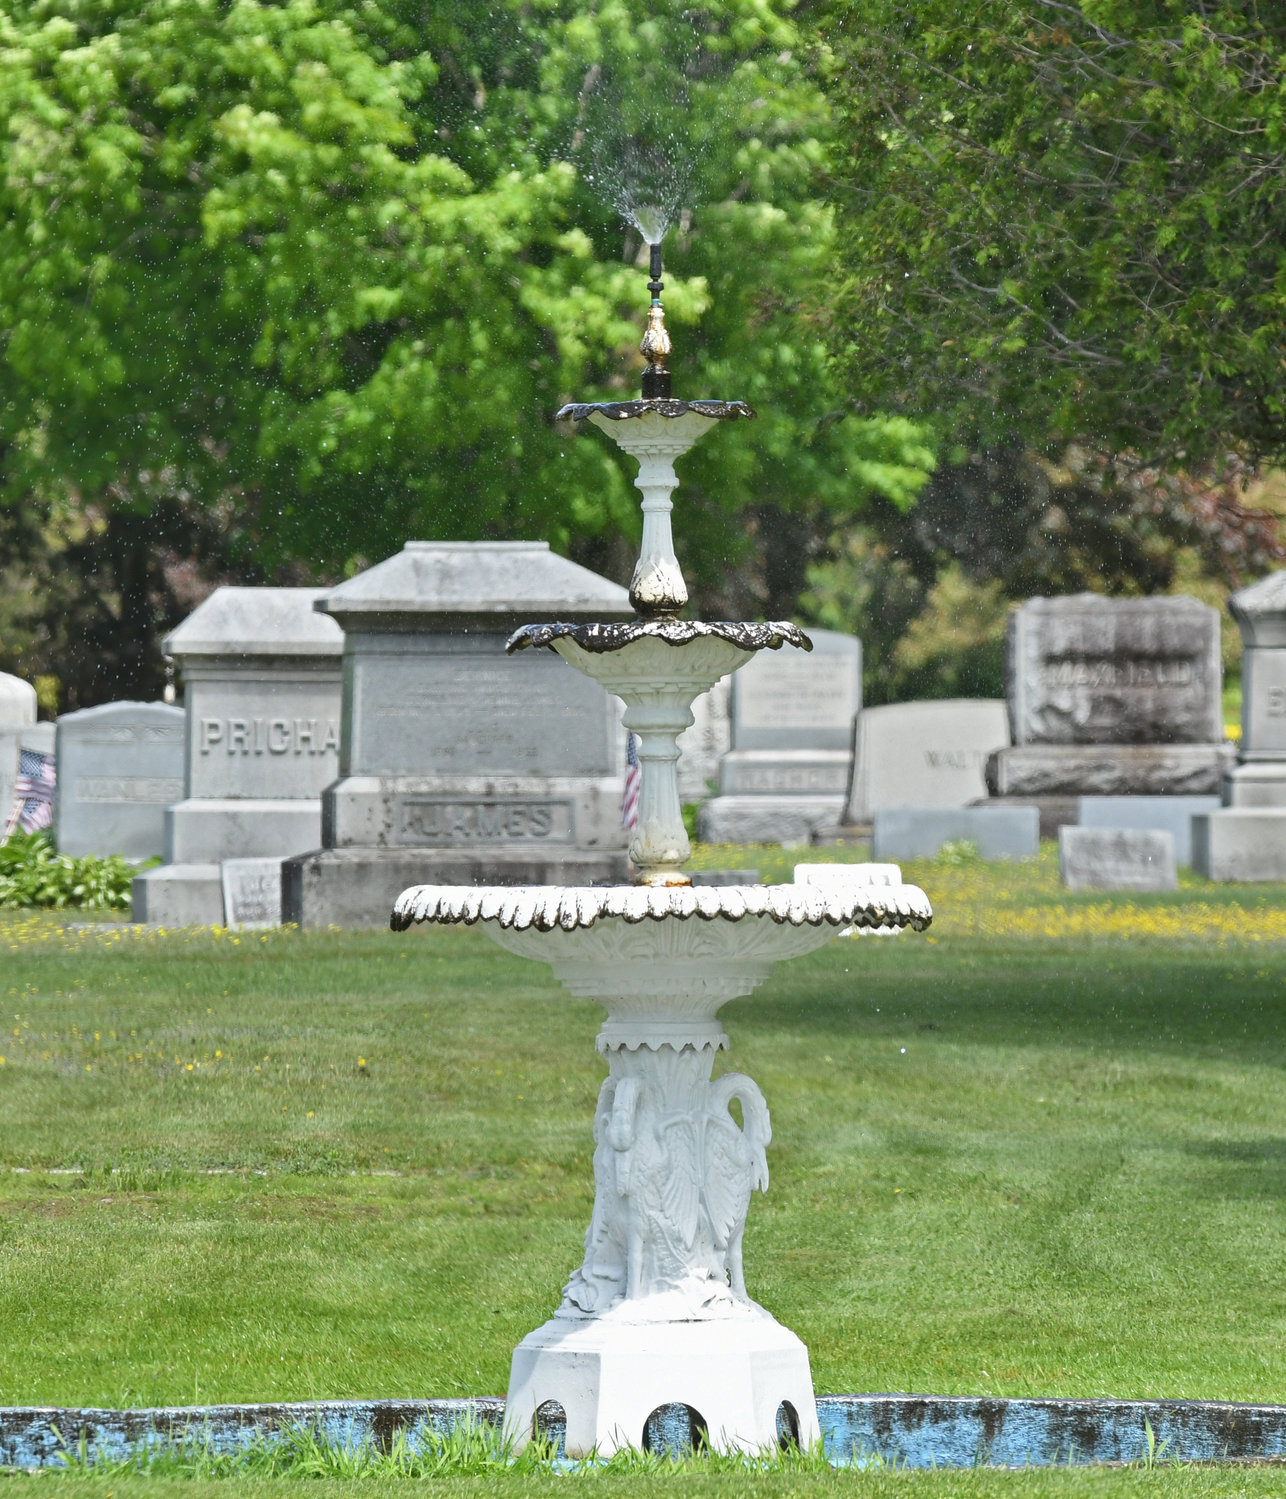 Fountain on the newer side of Prospect Cemetery adds to the serenity of the Prospect Cemetery.